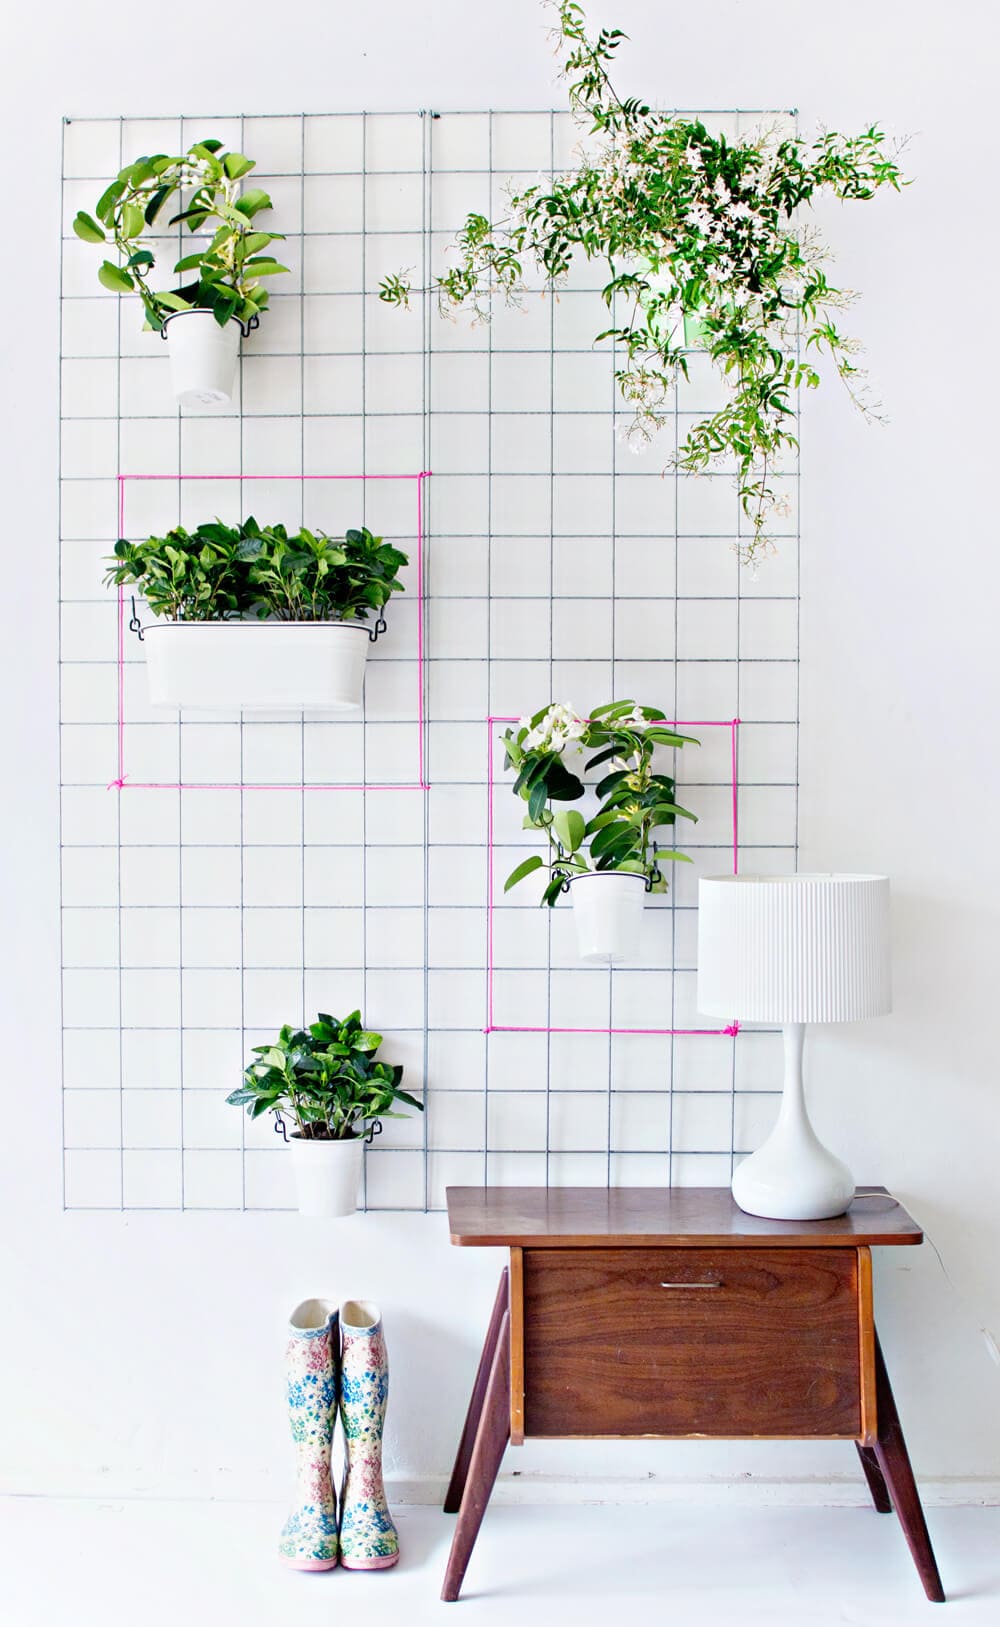 23 impressive hanging vases and planters ideas to decorate your boring wall - 83